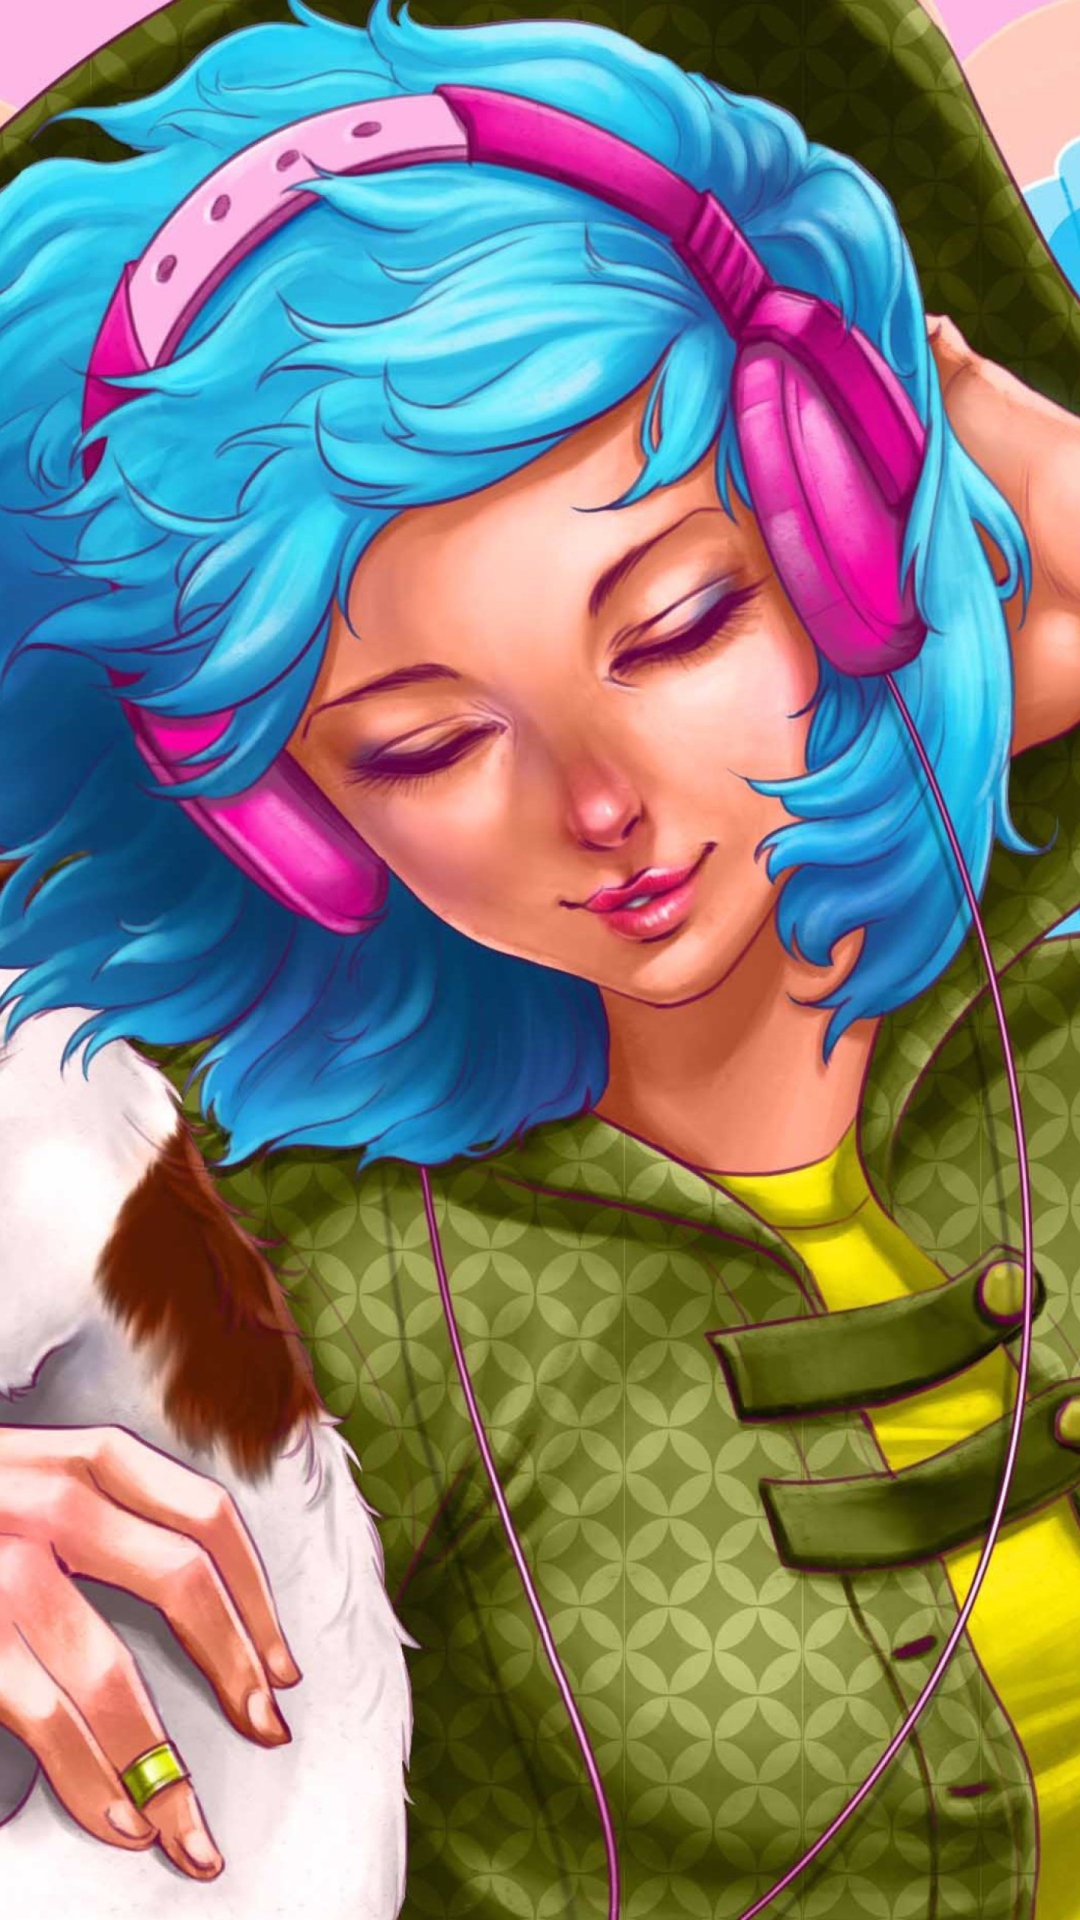 Sfondi Girl With Blue Hair And Pink Headphones Drawing 1080x1920